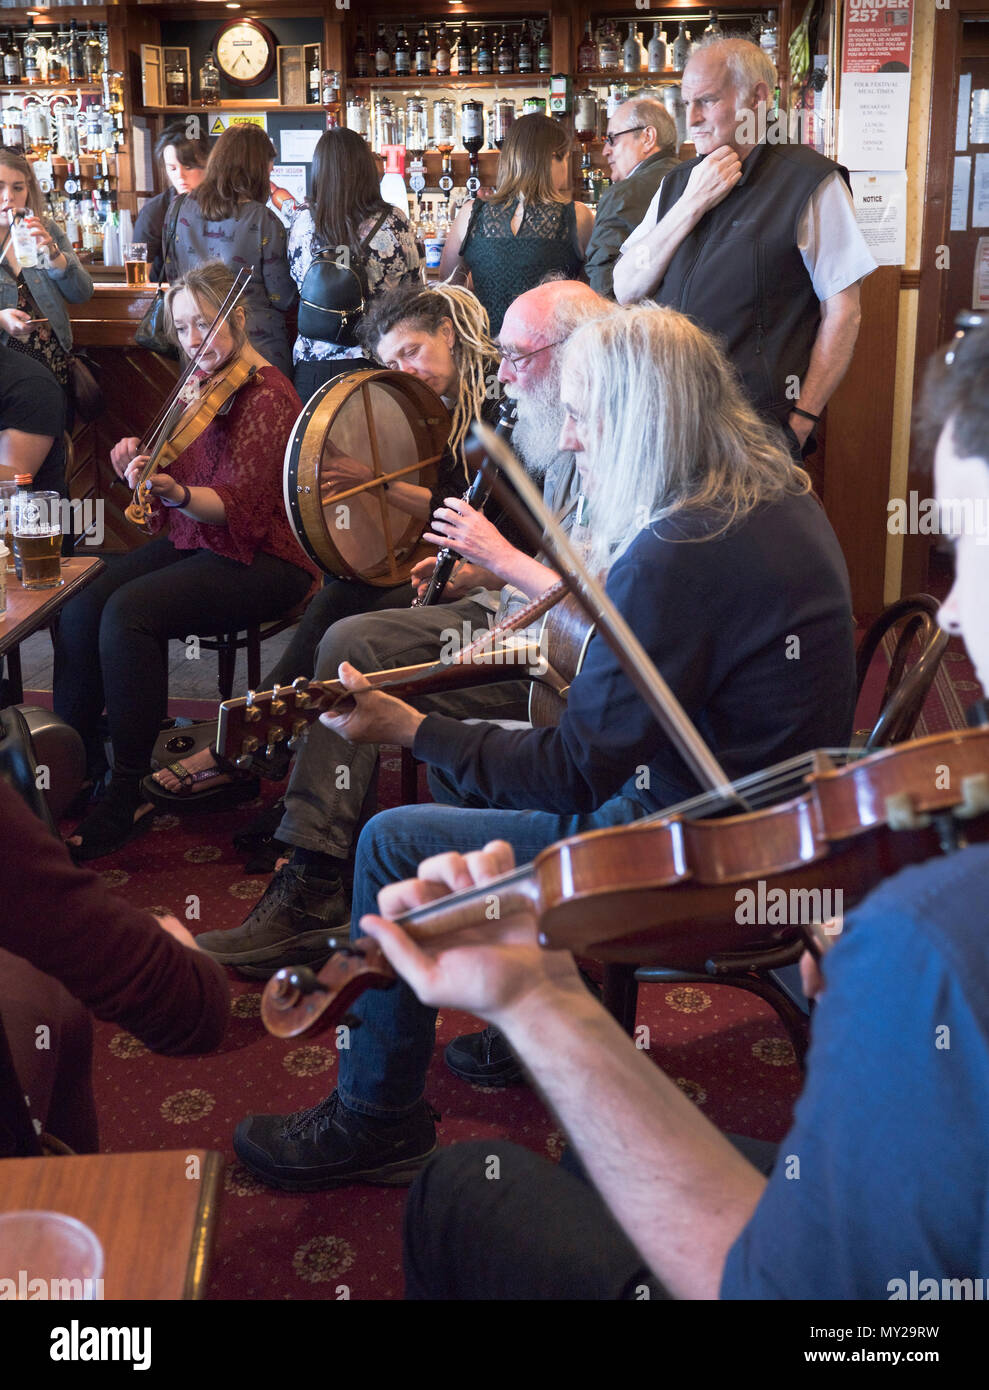 dh Stromness Folk Festival STROMNESS ORKNEY Folk musicians playing instruments in pub Scotland fiddle music Stock Photo